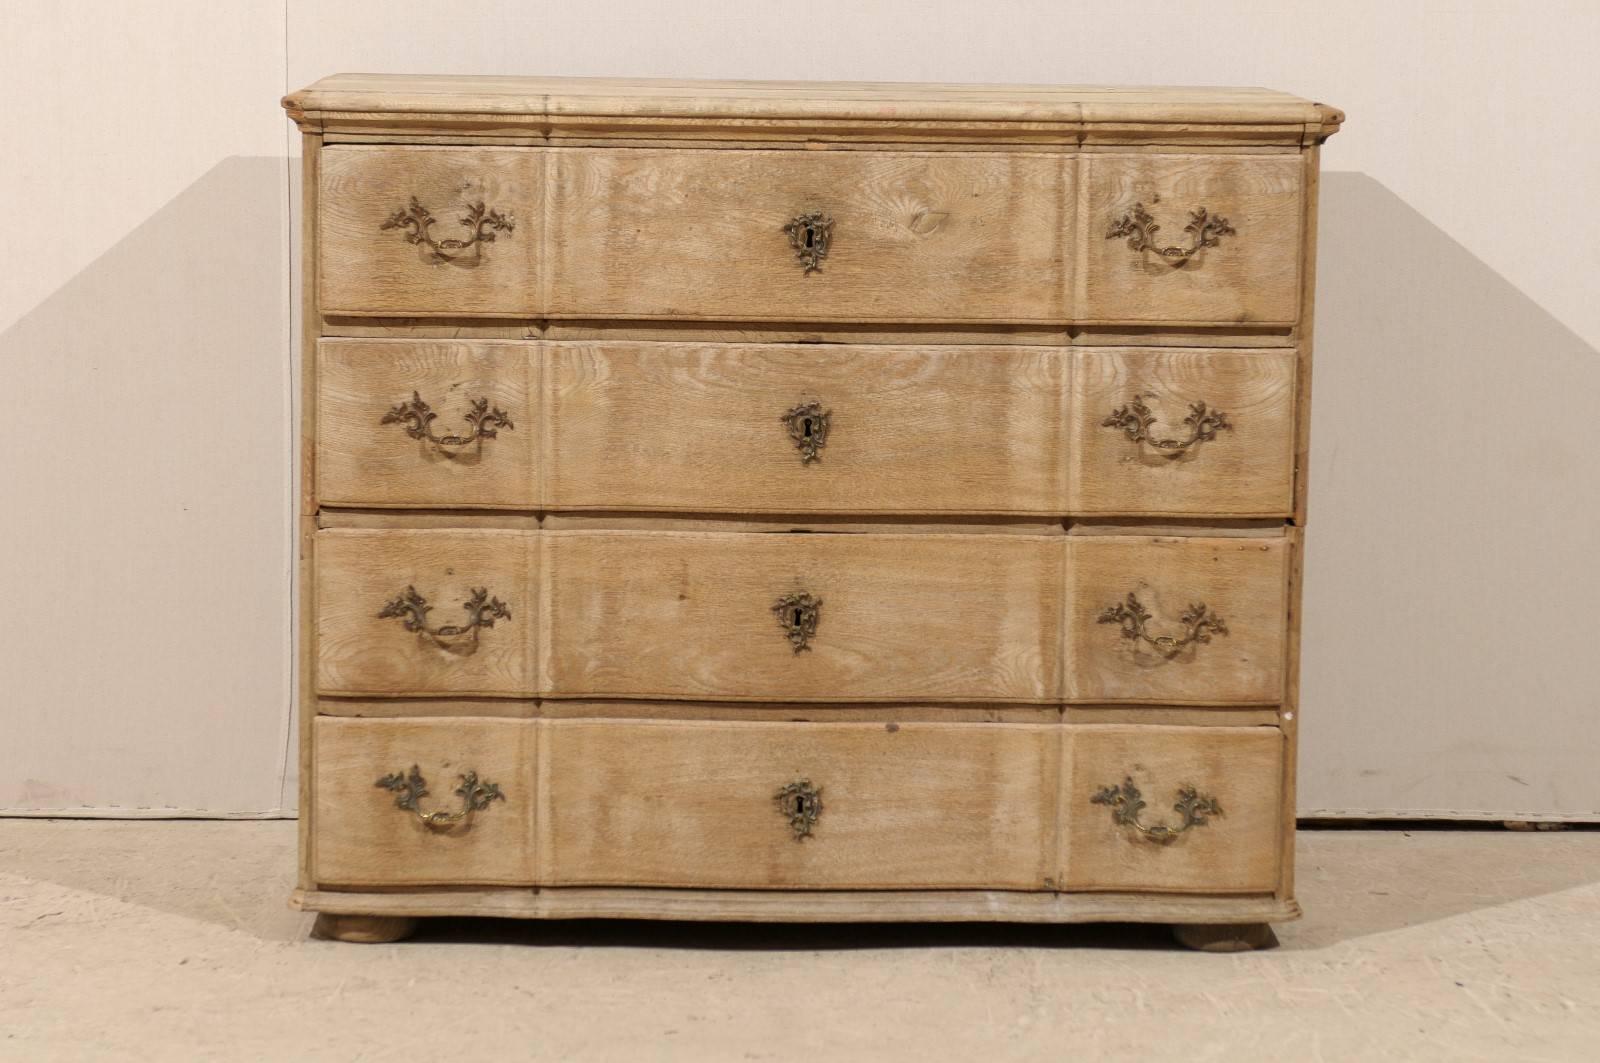 A Dutch, mid-19th century chest. This four-drawer chest with slightly serpentine front and drawers features a Rococo style hardware. This chest from circa 1850 is raised on small bun feet in the front and square in the back. It has a nice bleached